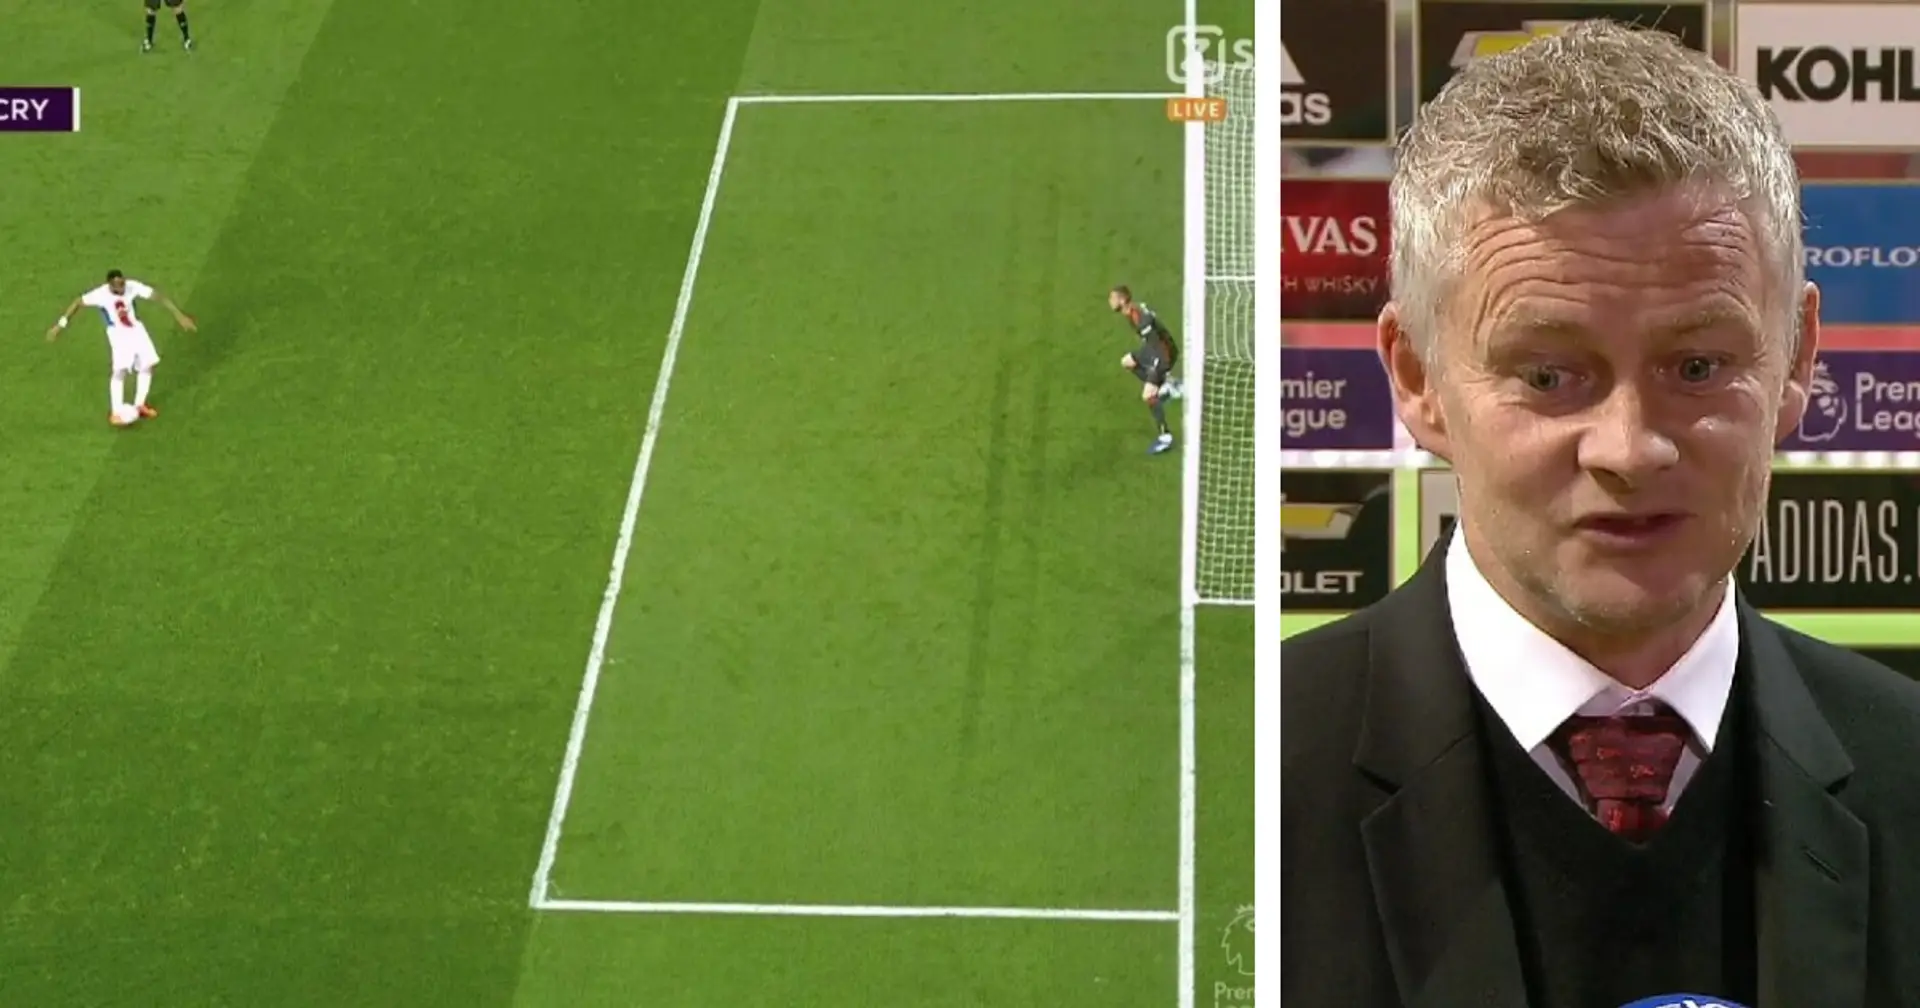 Solskjaer accepts penalty retake call but refuses to agree with initial decision to award one